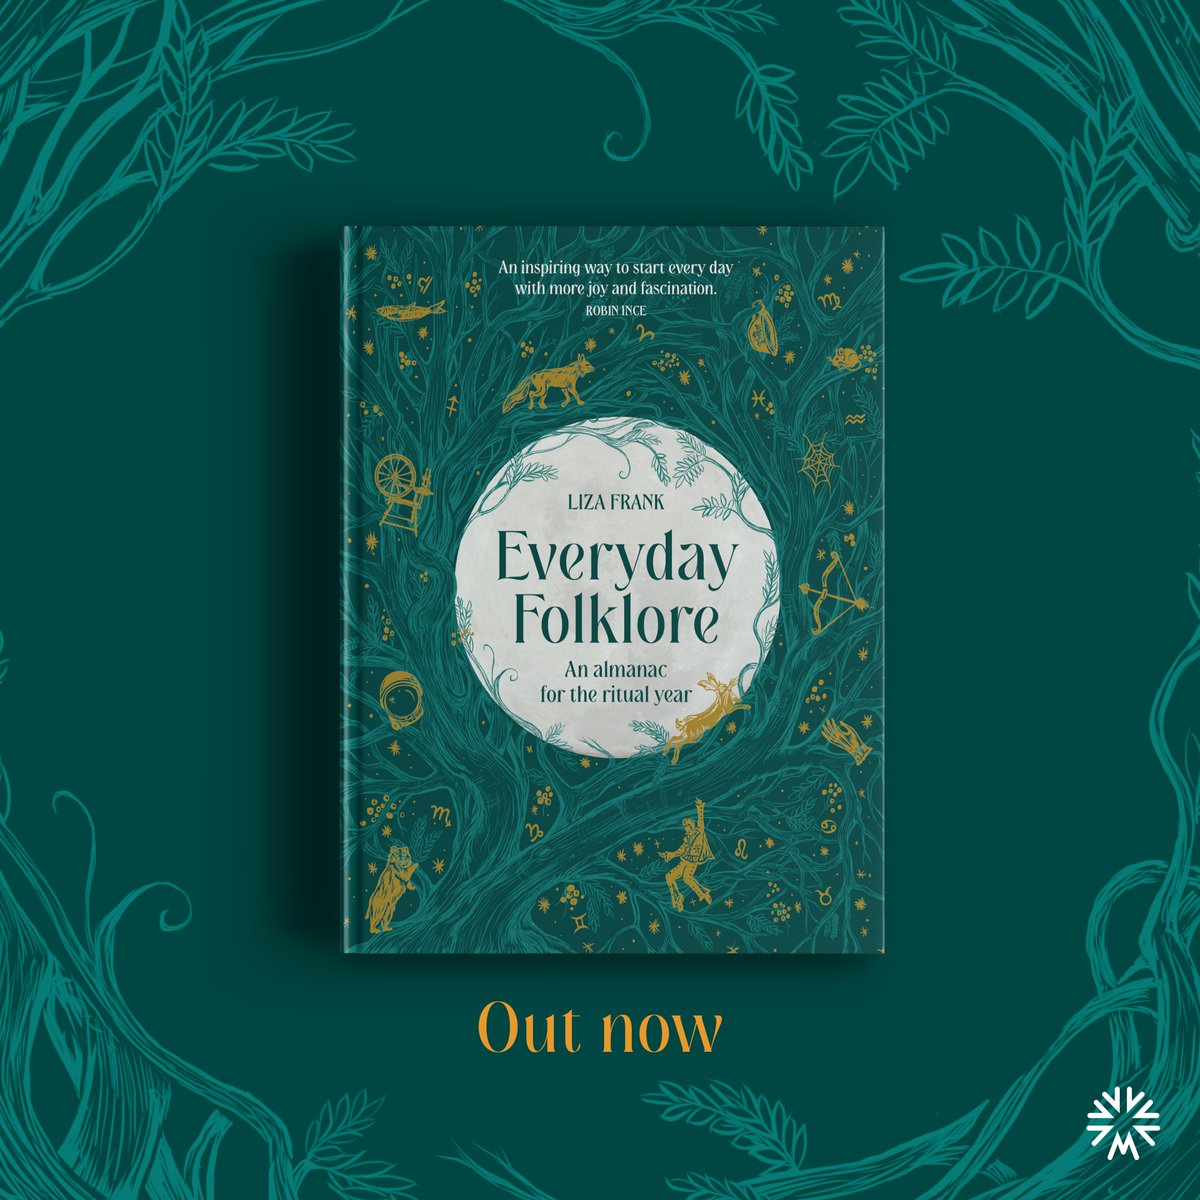 🌳IT'S PUBLICATION DAY🌳
Everyday Folklore by @lilithepunk is out TODAY with @MurdochBooks_UK & @murdochbooks!
Congratulations, Liza!
geni.us/yb19J8W